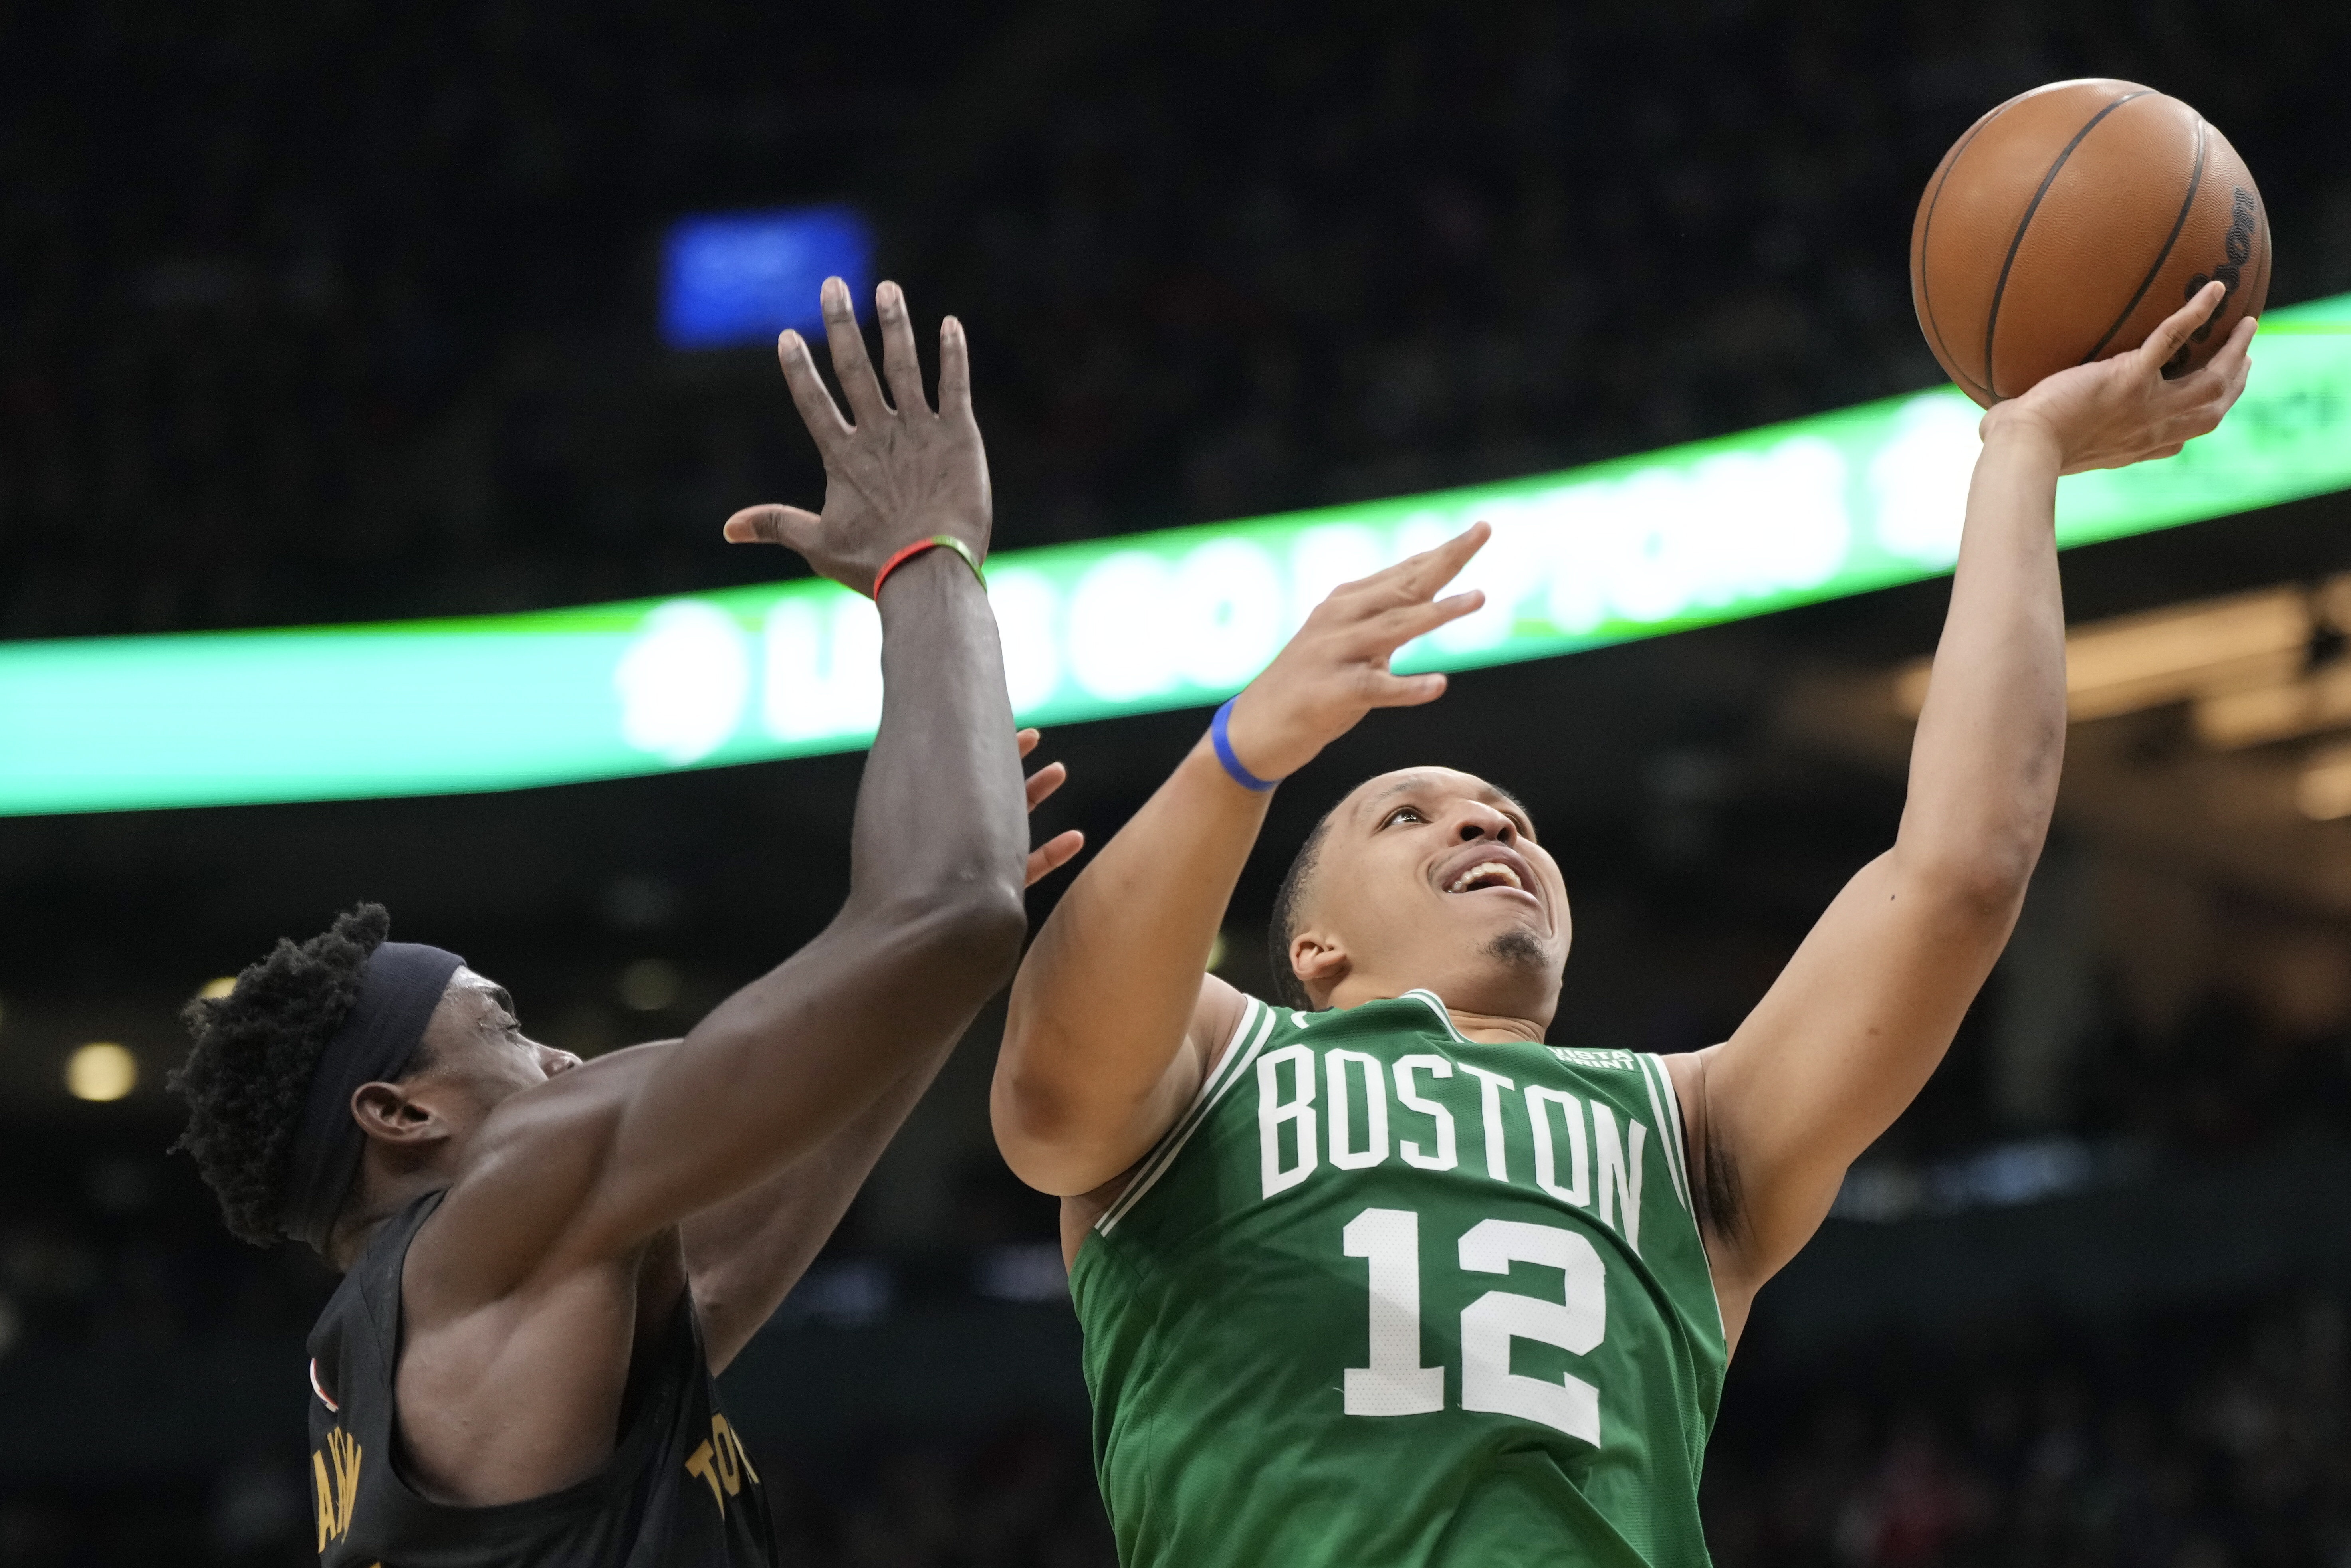 Jayson Tatum gives us banger of a photo in win over Raptors